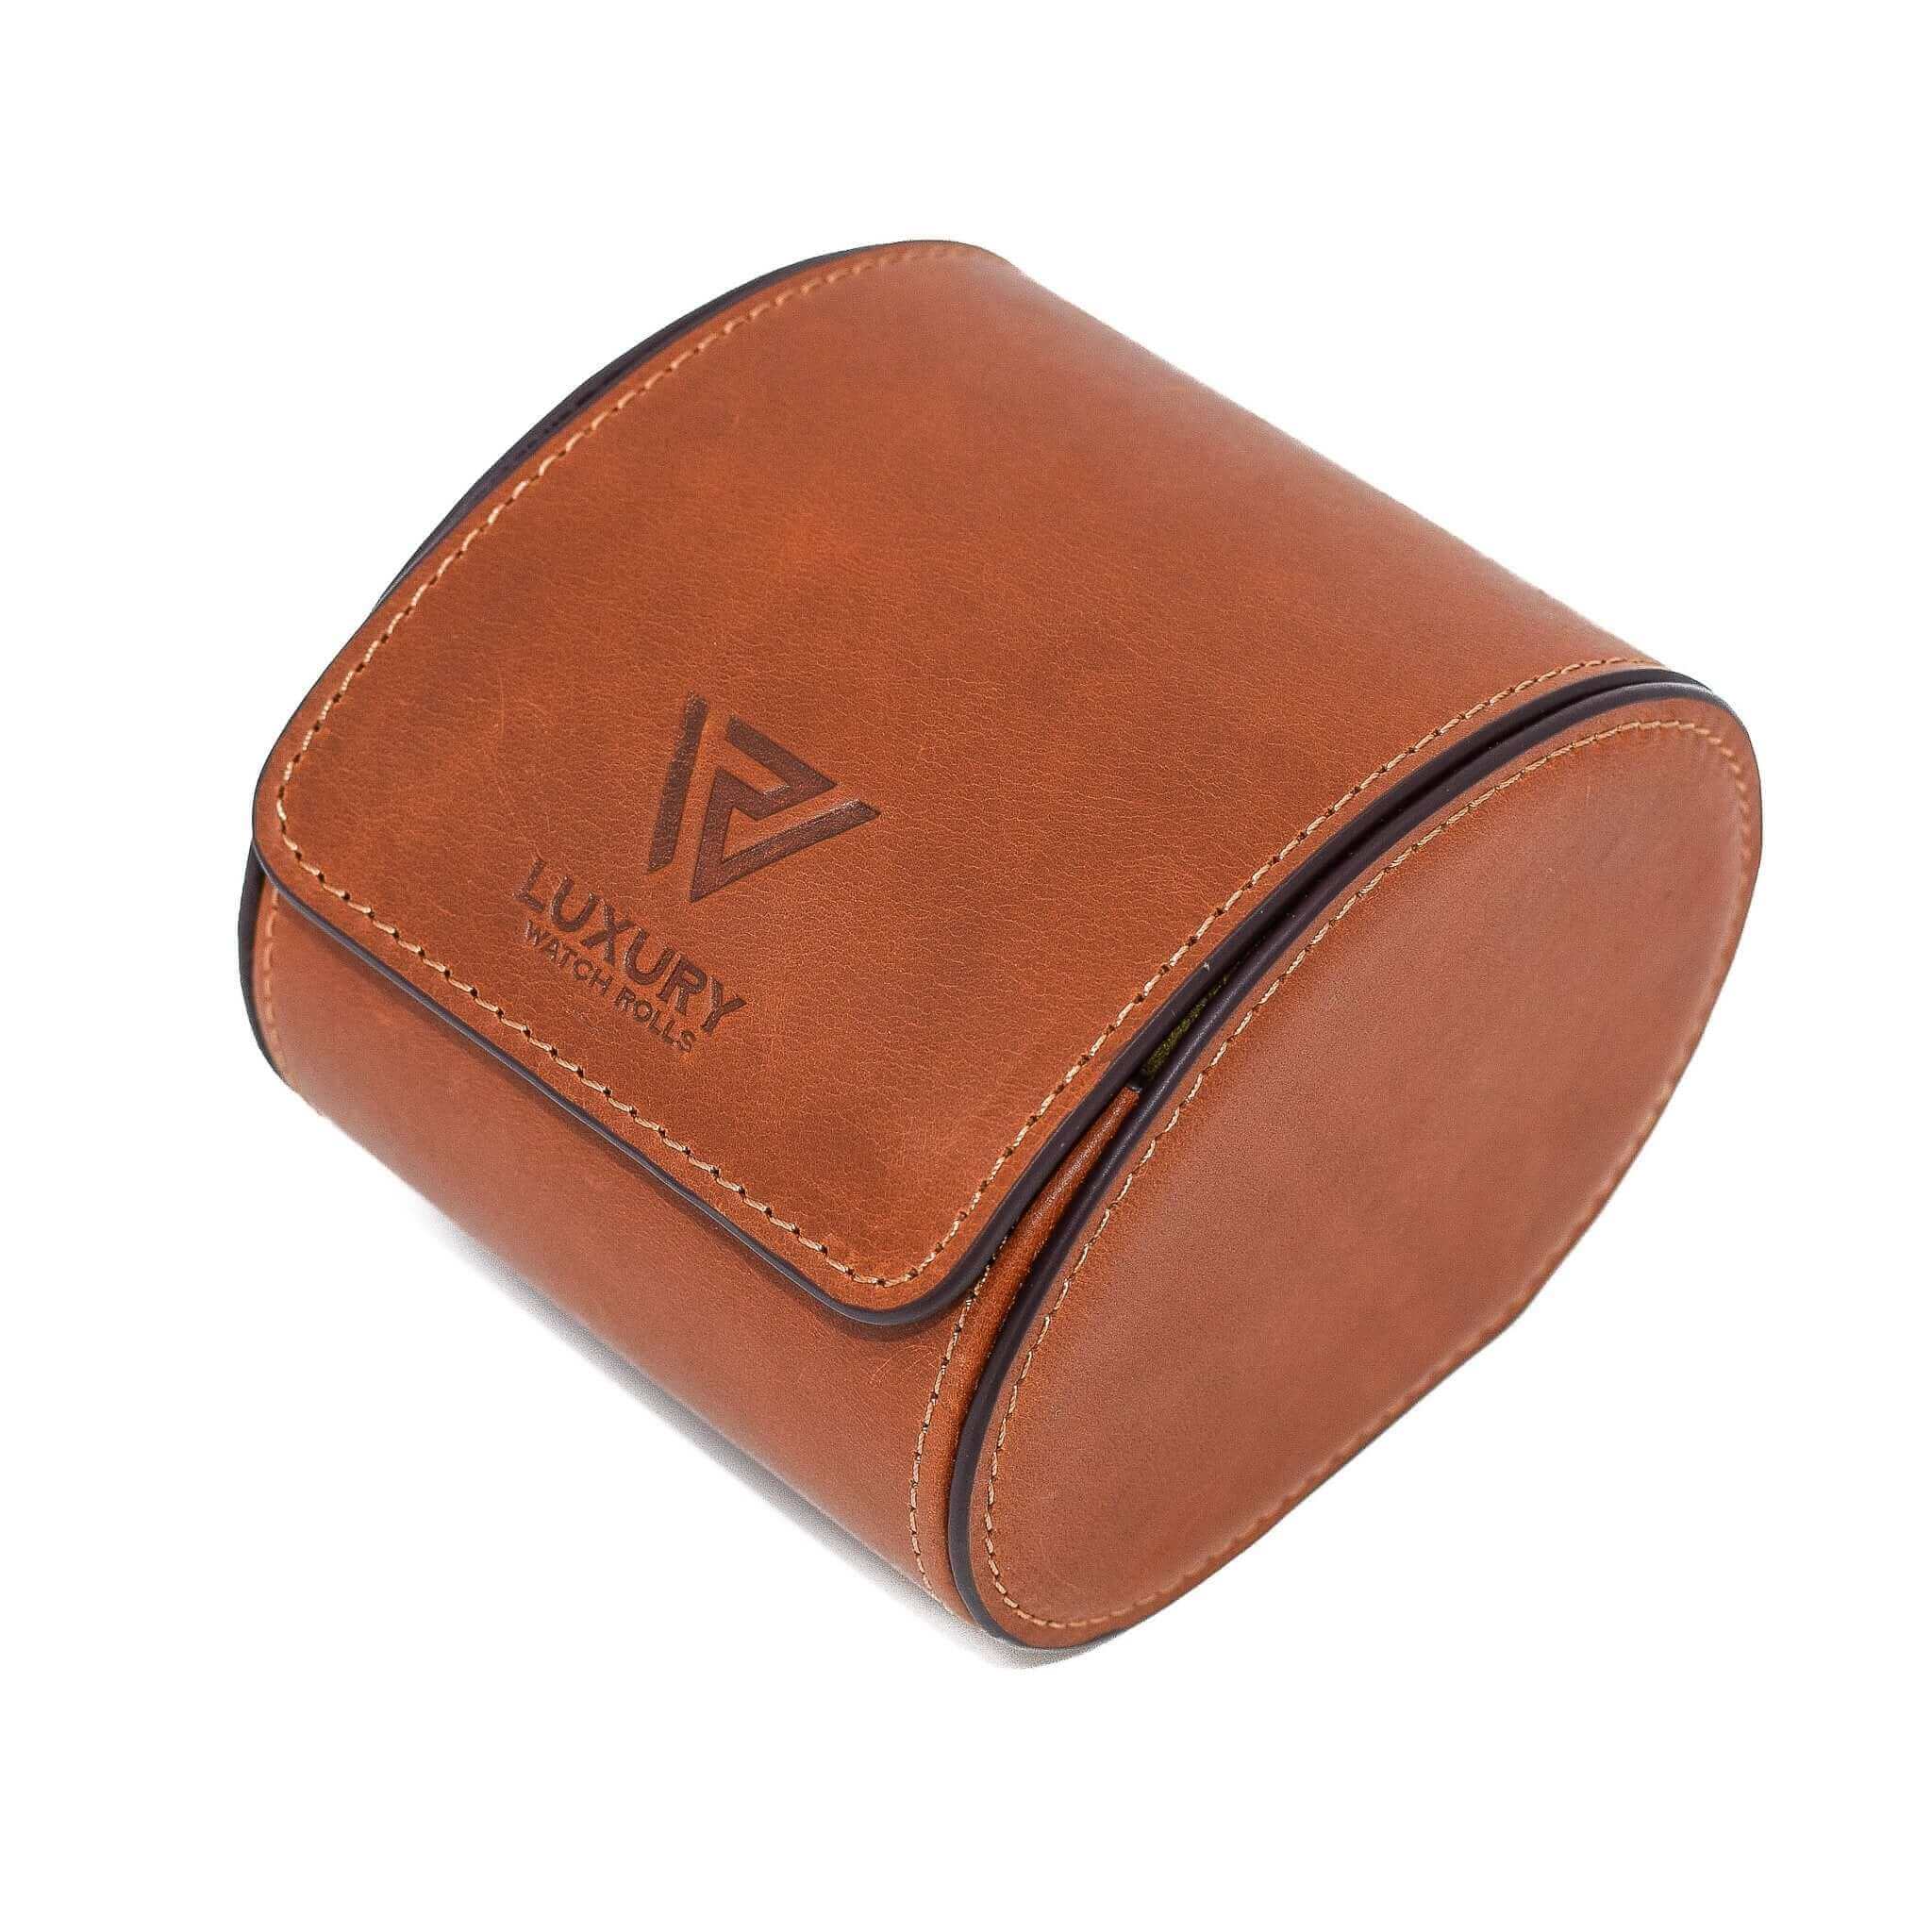 A side view of Luxury Watch Roll's single slot, vintage brown leather watch roll for one watch storage.